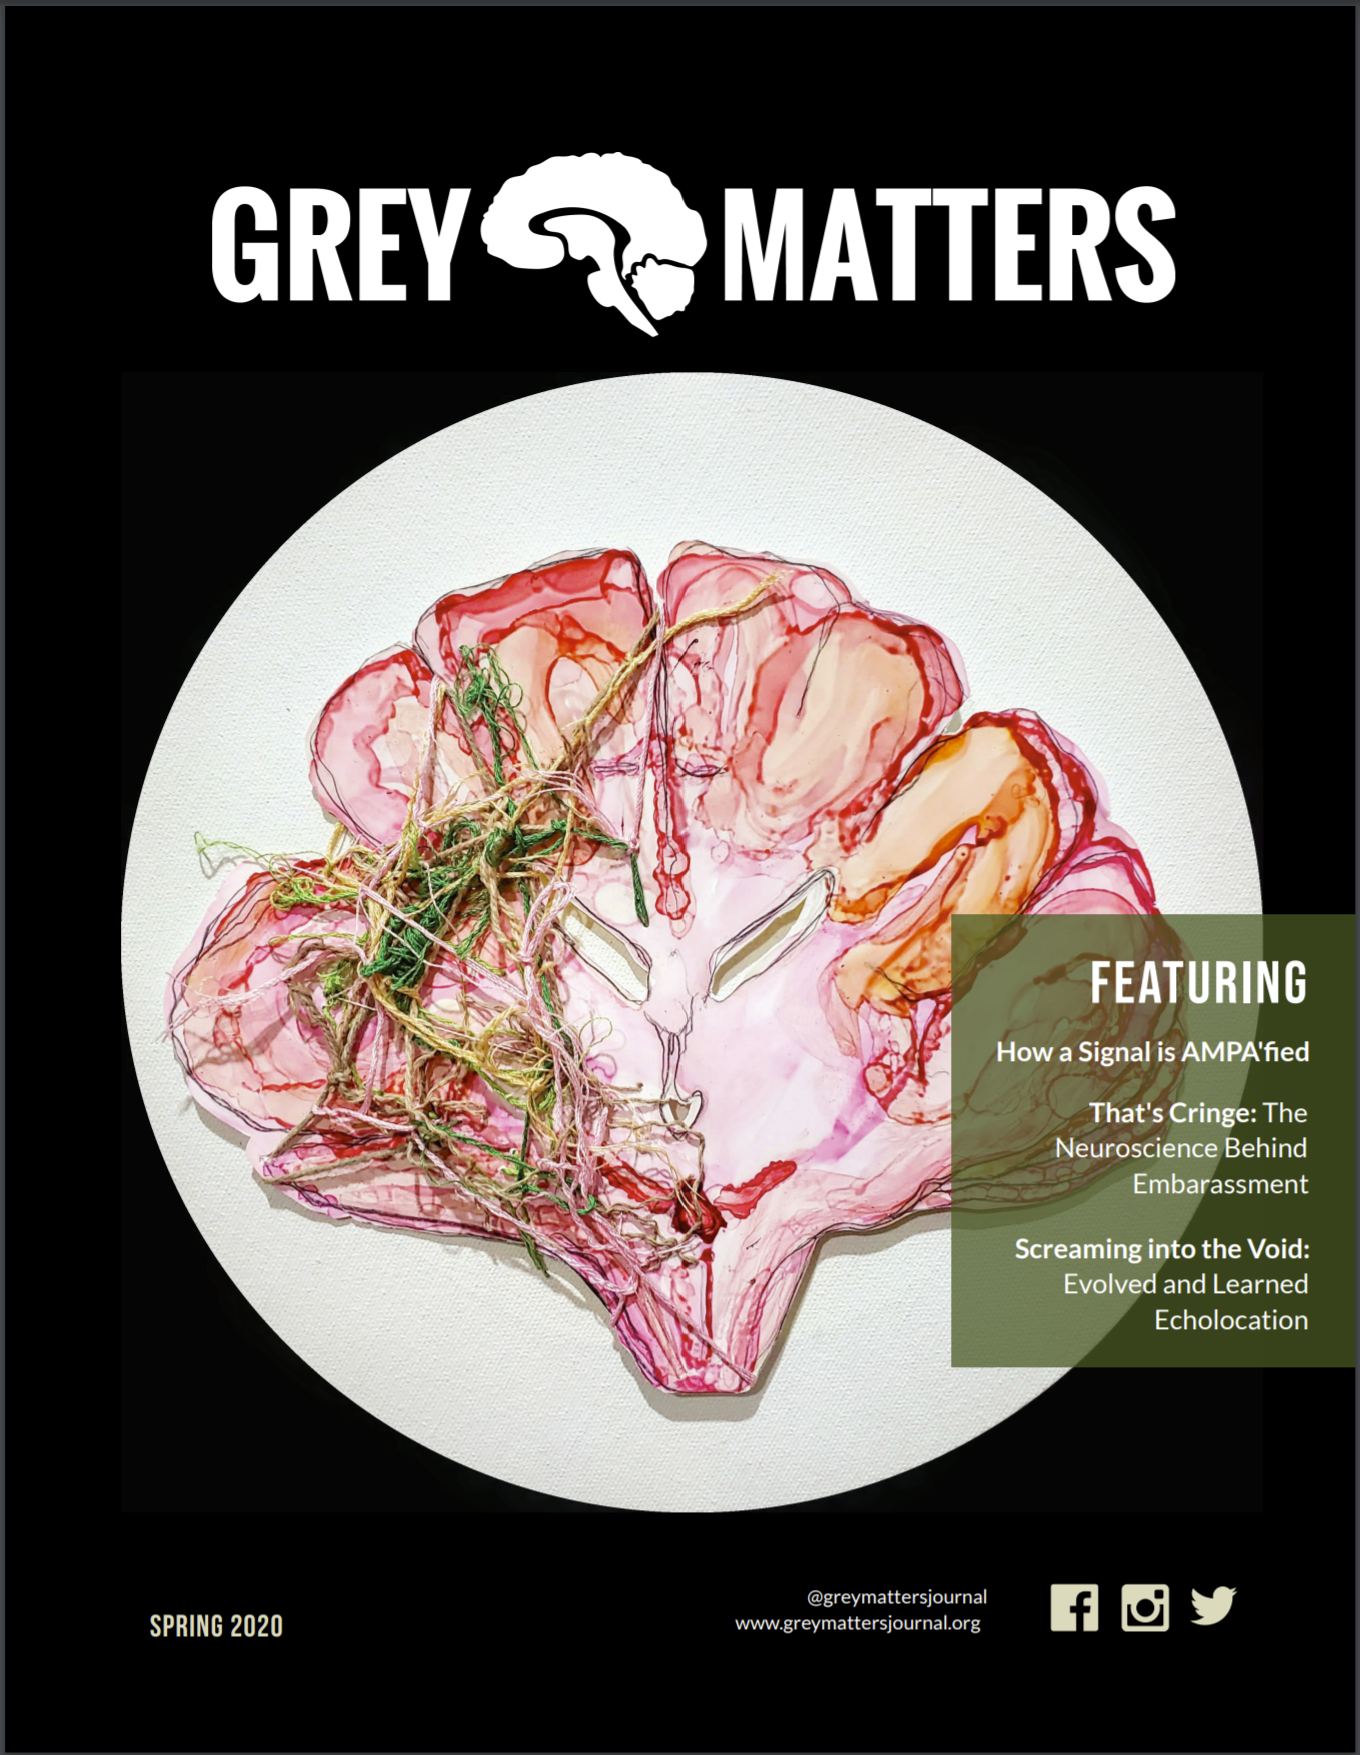 Grey Matters' latest issue